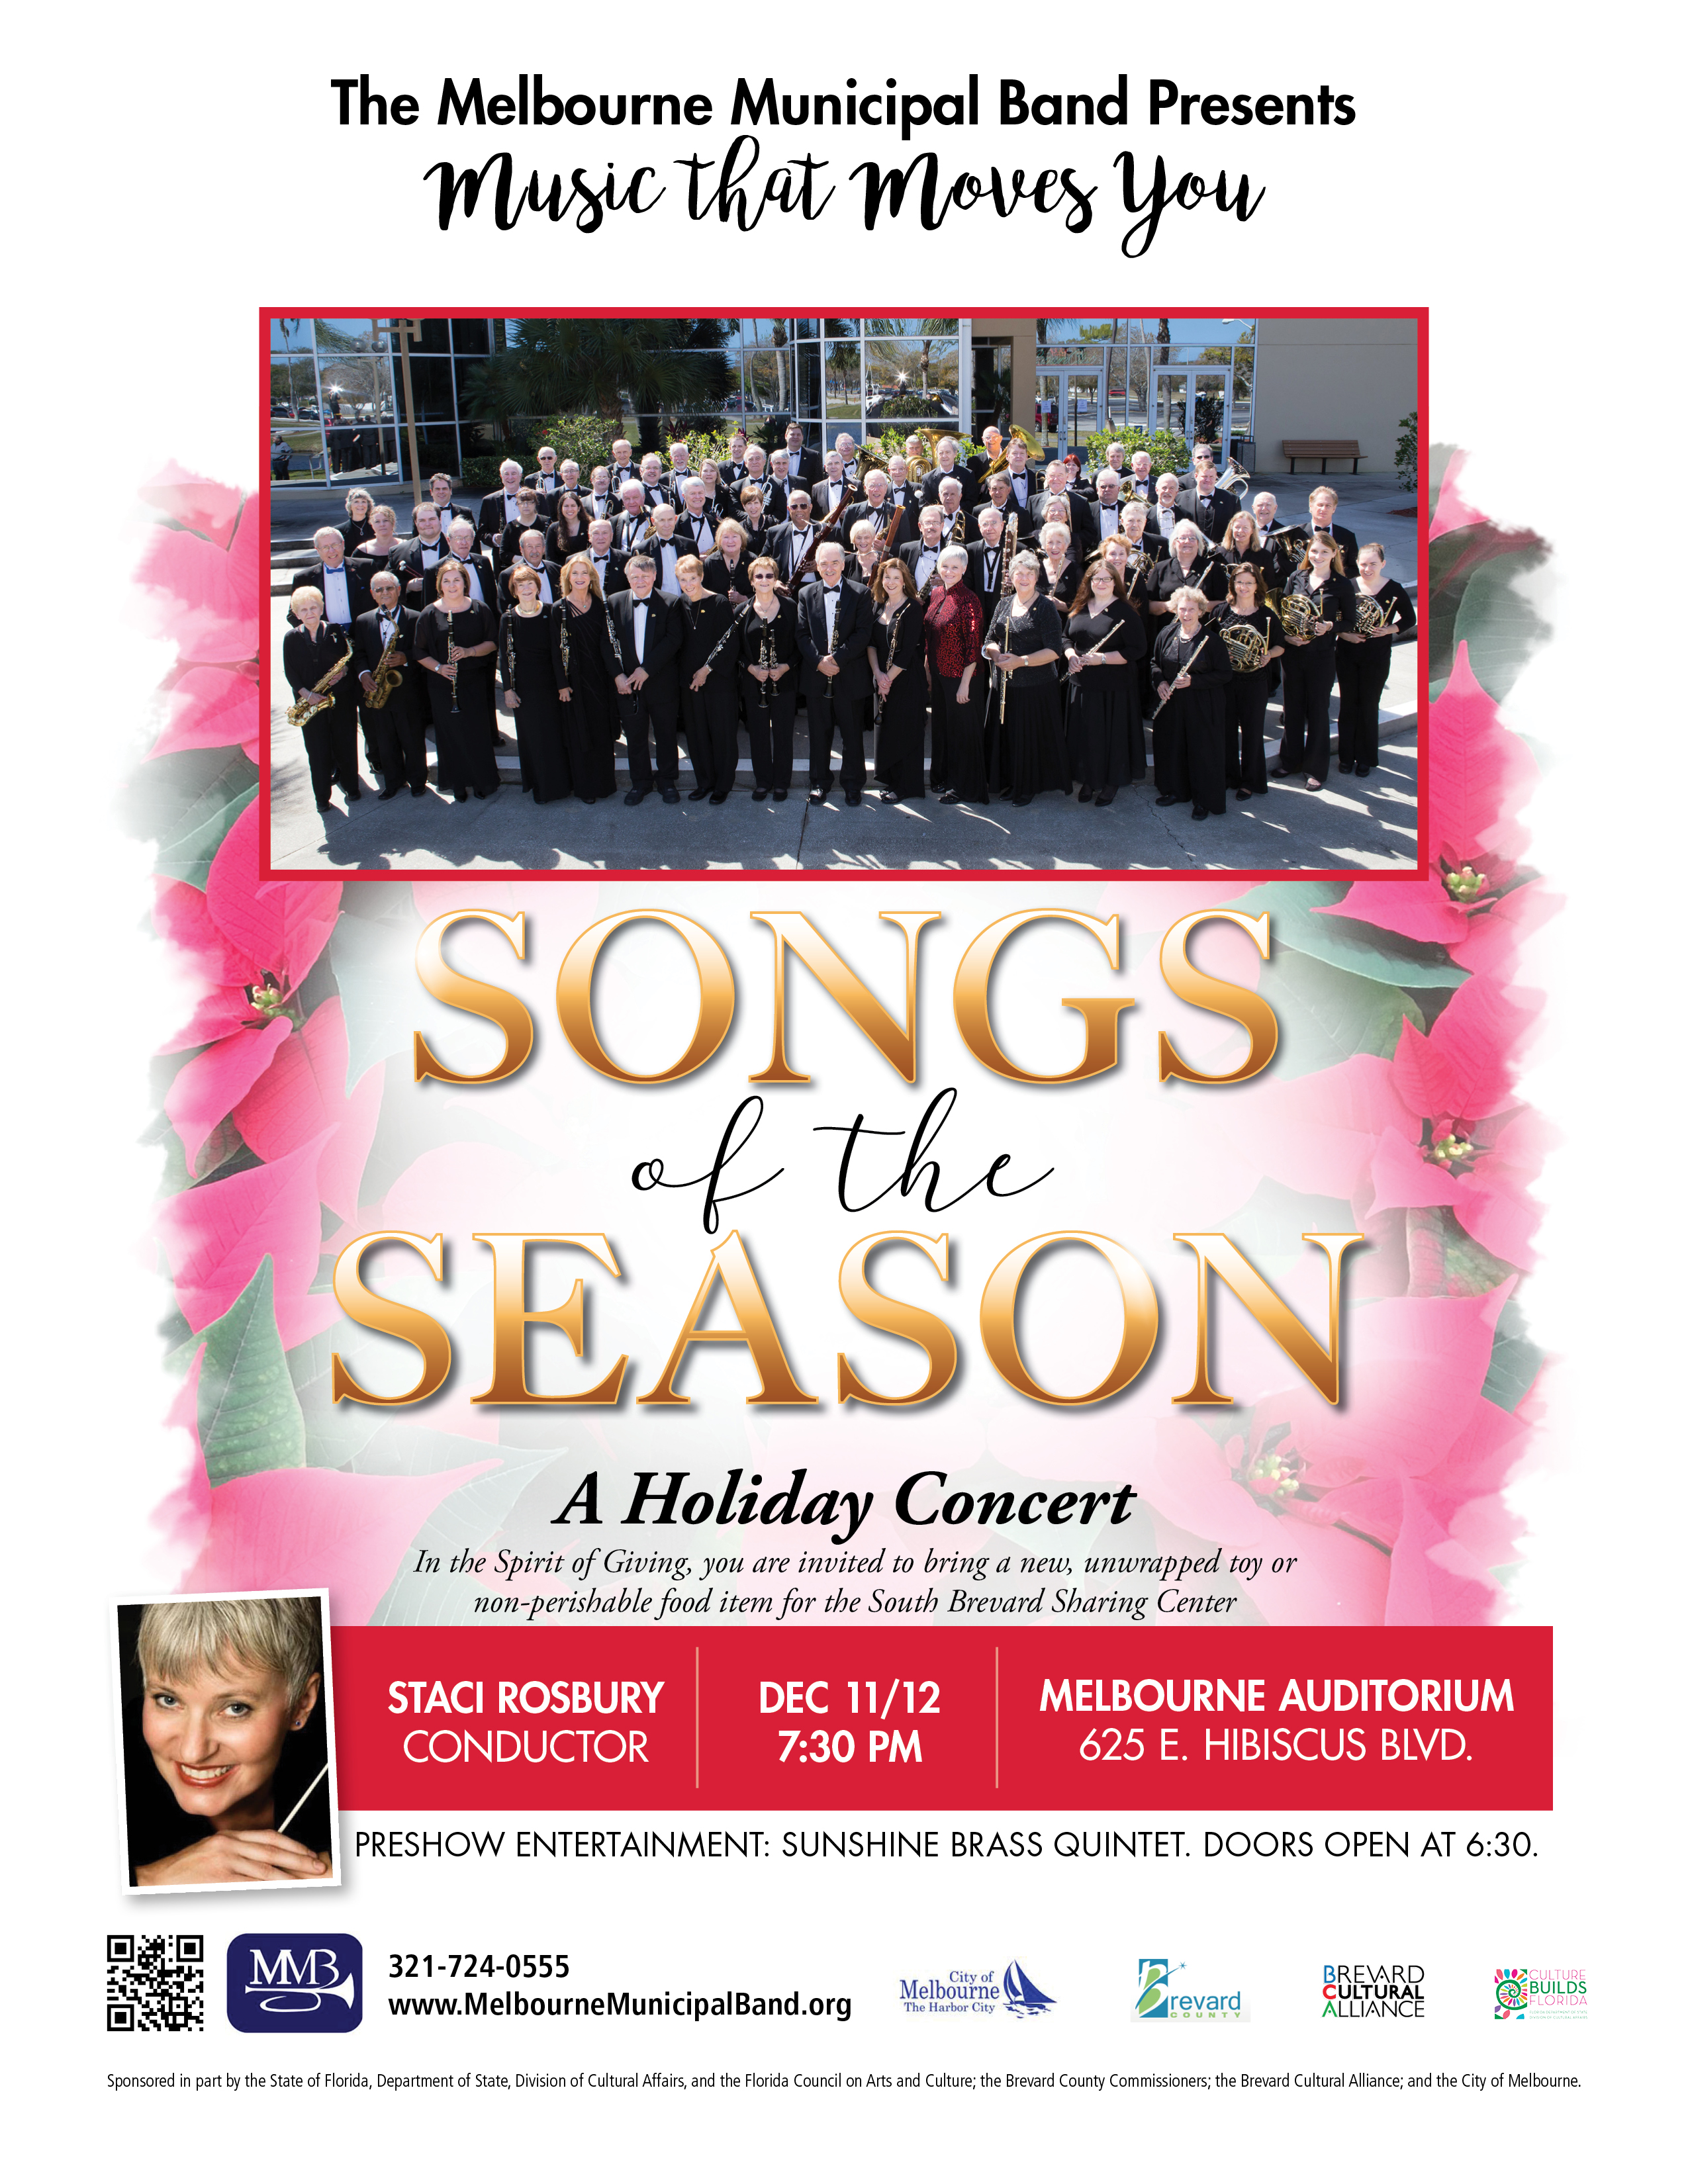 Songs of the Season presented by The Melbourne Municipal Band